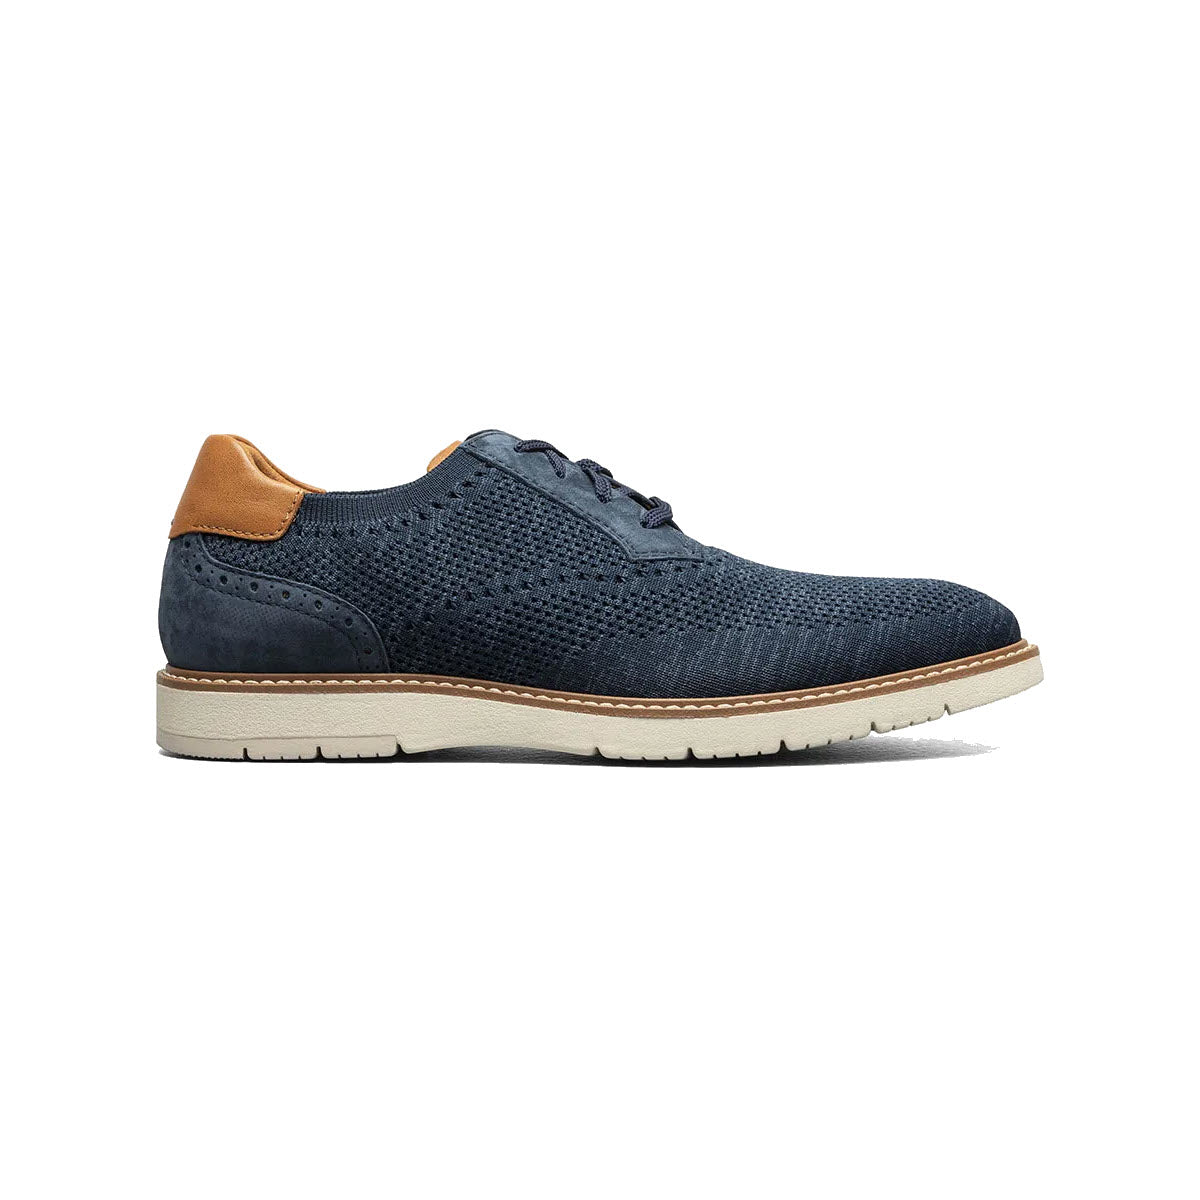 A single navy blue Florsheim Vibe Knit Plain Toe Oxford men's dress shoe with brogue detailing and a contrasting tan leather heel, set against a white background.